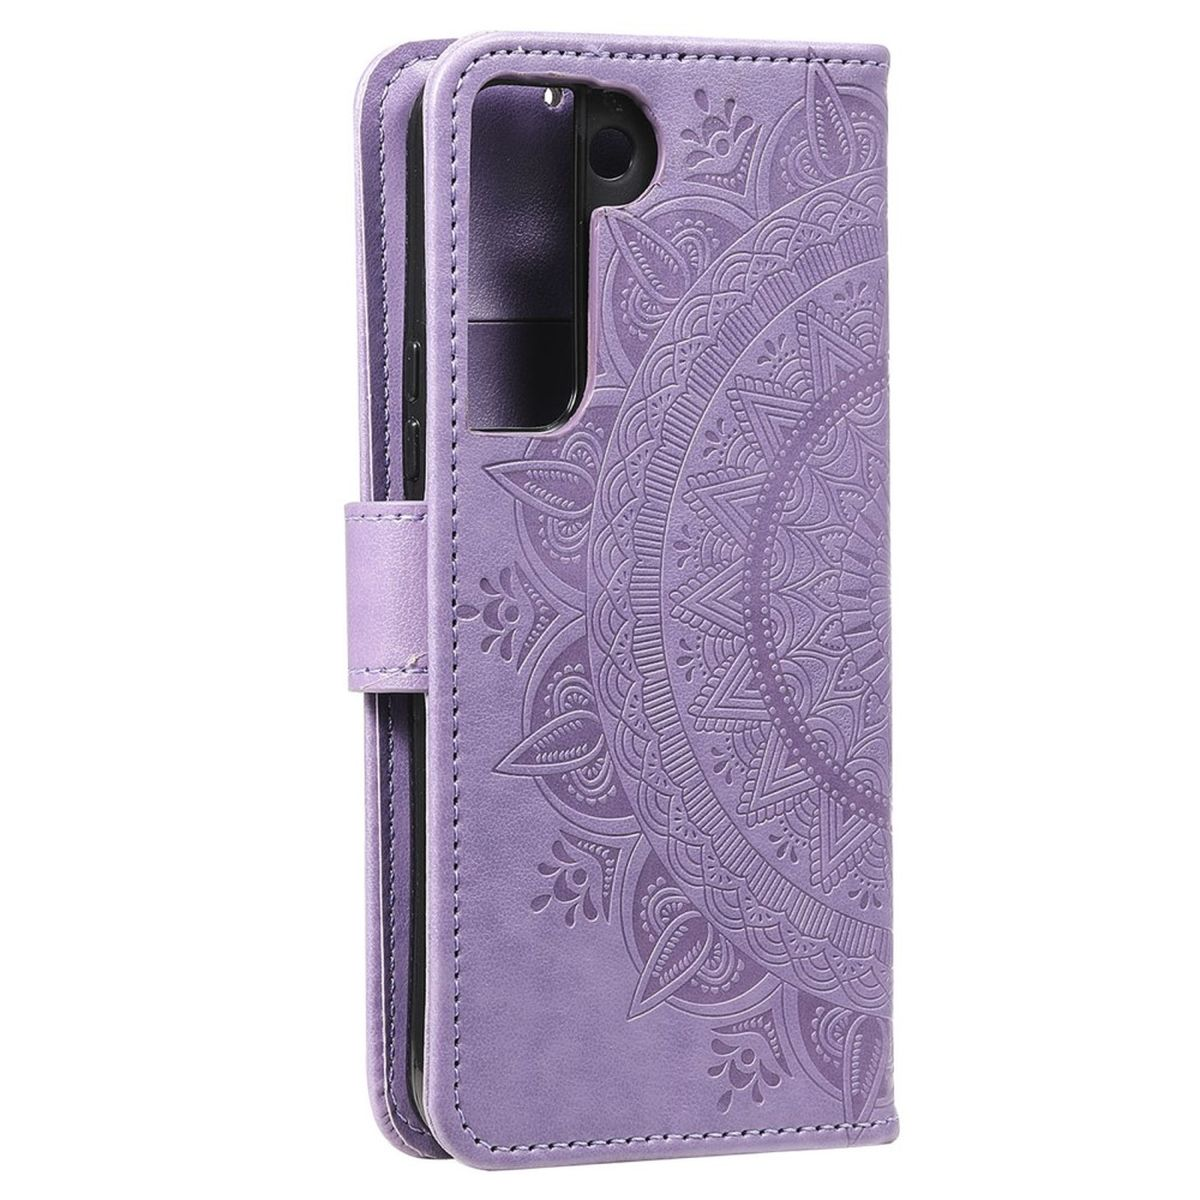 COVERKINGZ Klapphülle Bookcover, Muster, S22 Galaxy Lila Samsung, Mandala 5G, mit